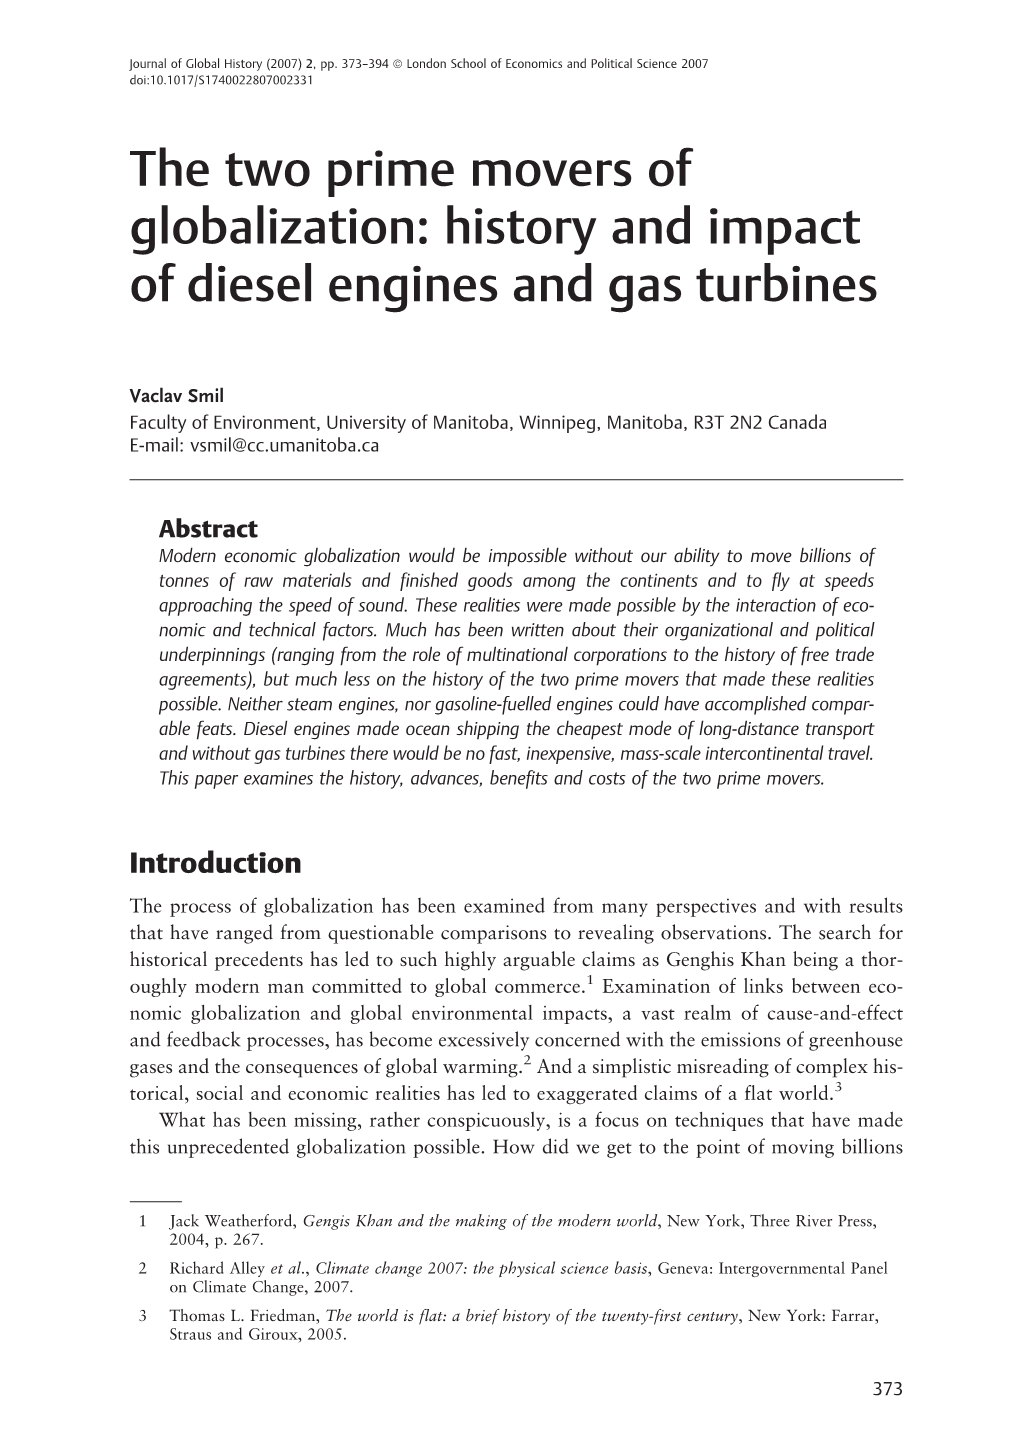 The Two Prime Movers of Globalization: History and Impact of Diesel Engines and Gas Turbines